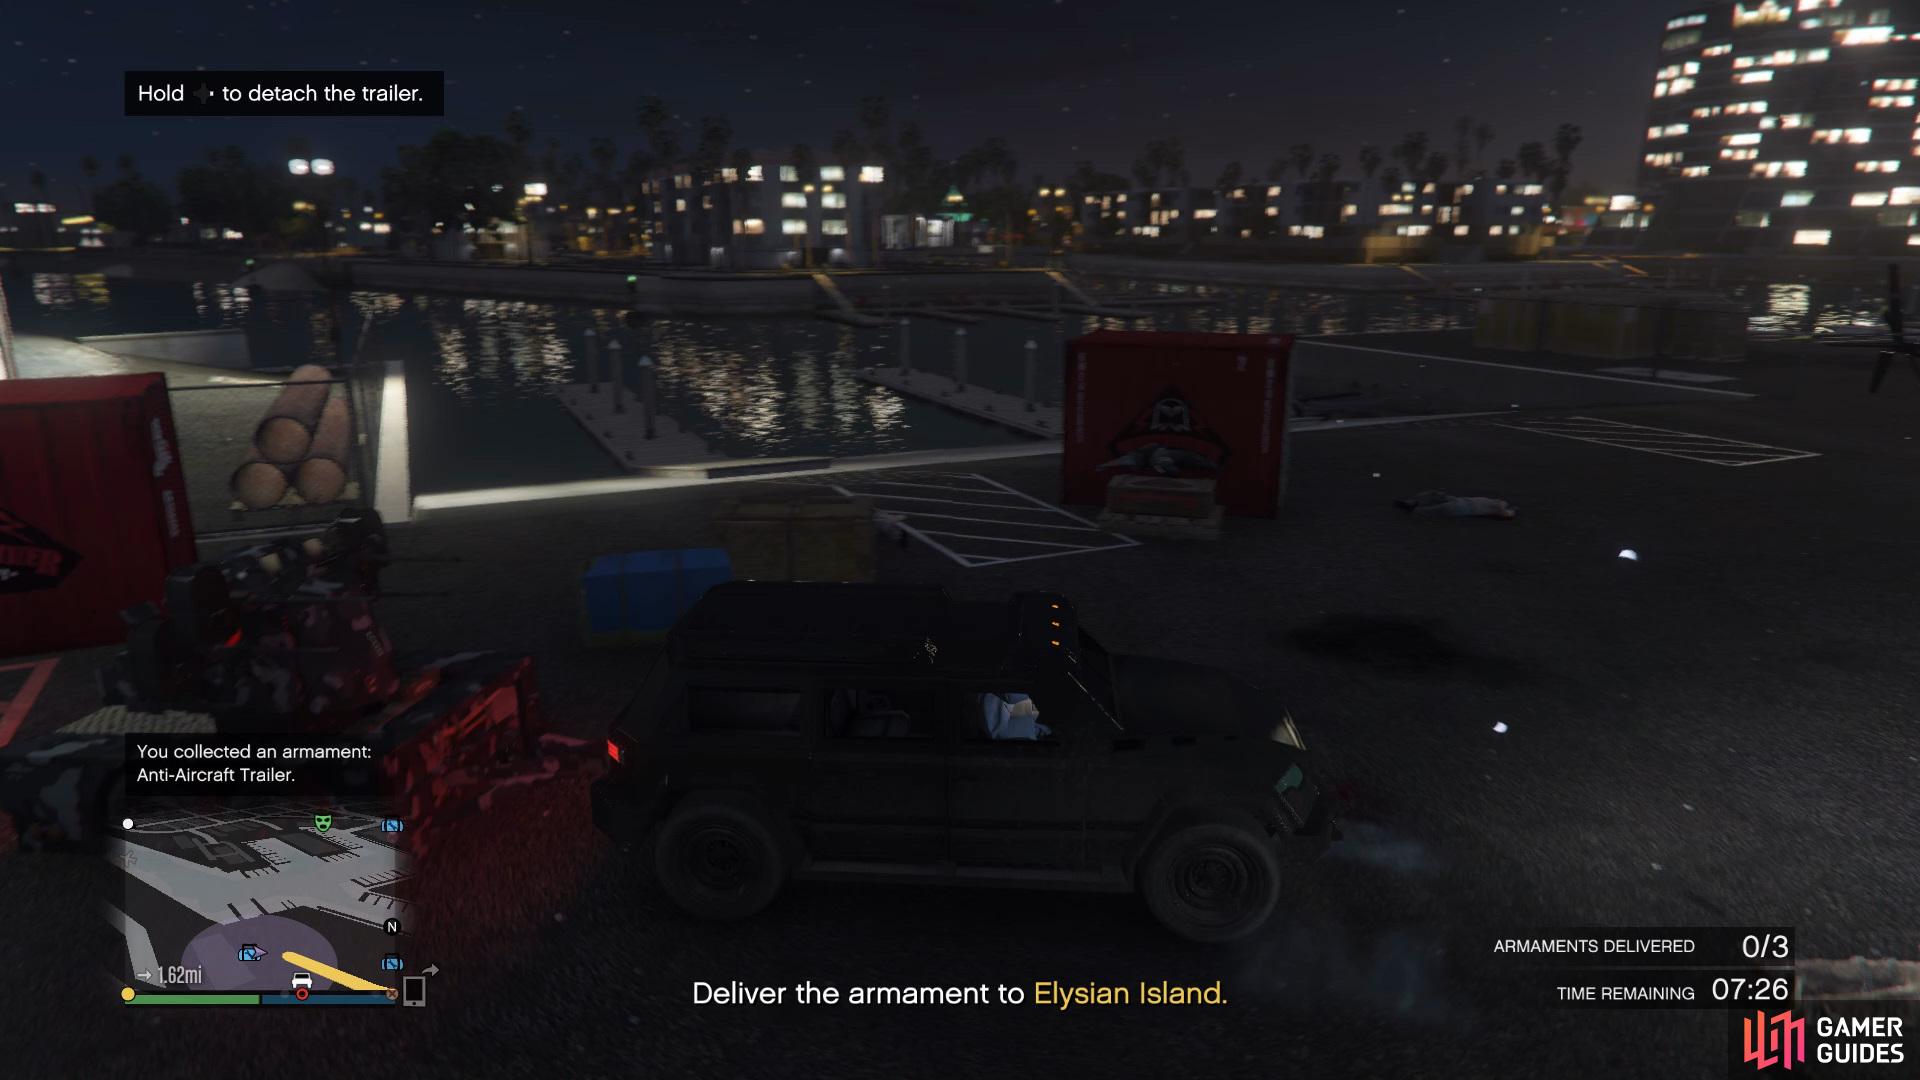 then use the vehicle nearby and hook it up to the tow bar which will allow you to drive it to Elysian Island.